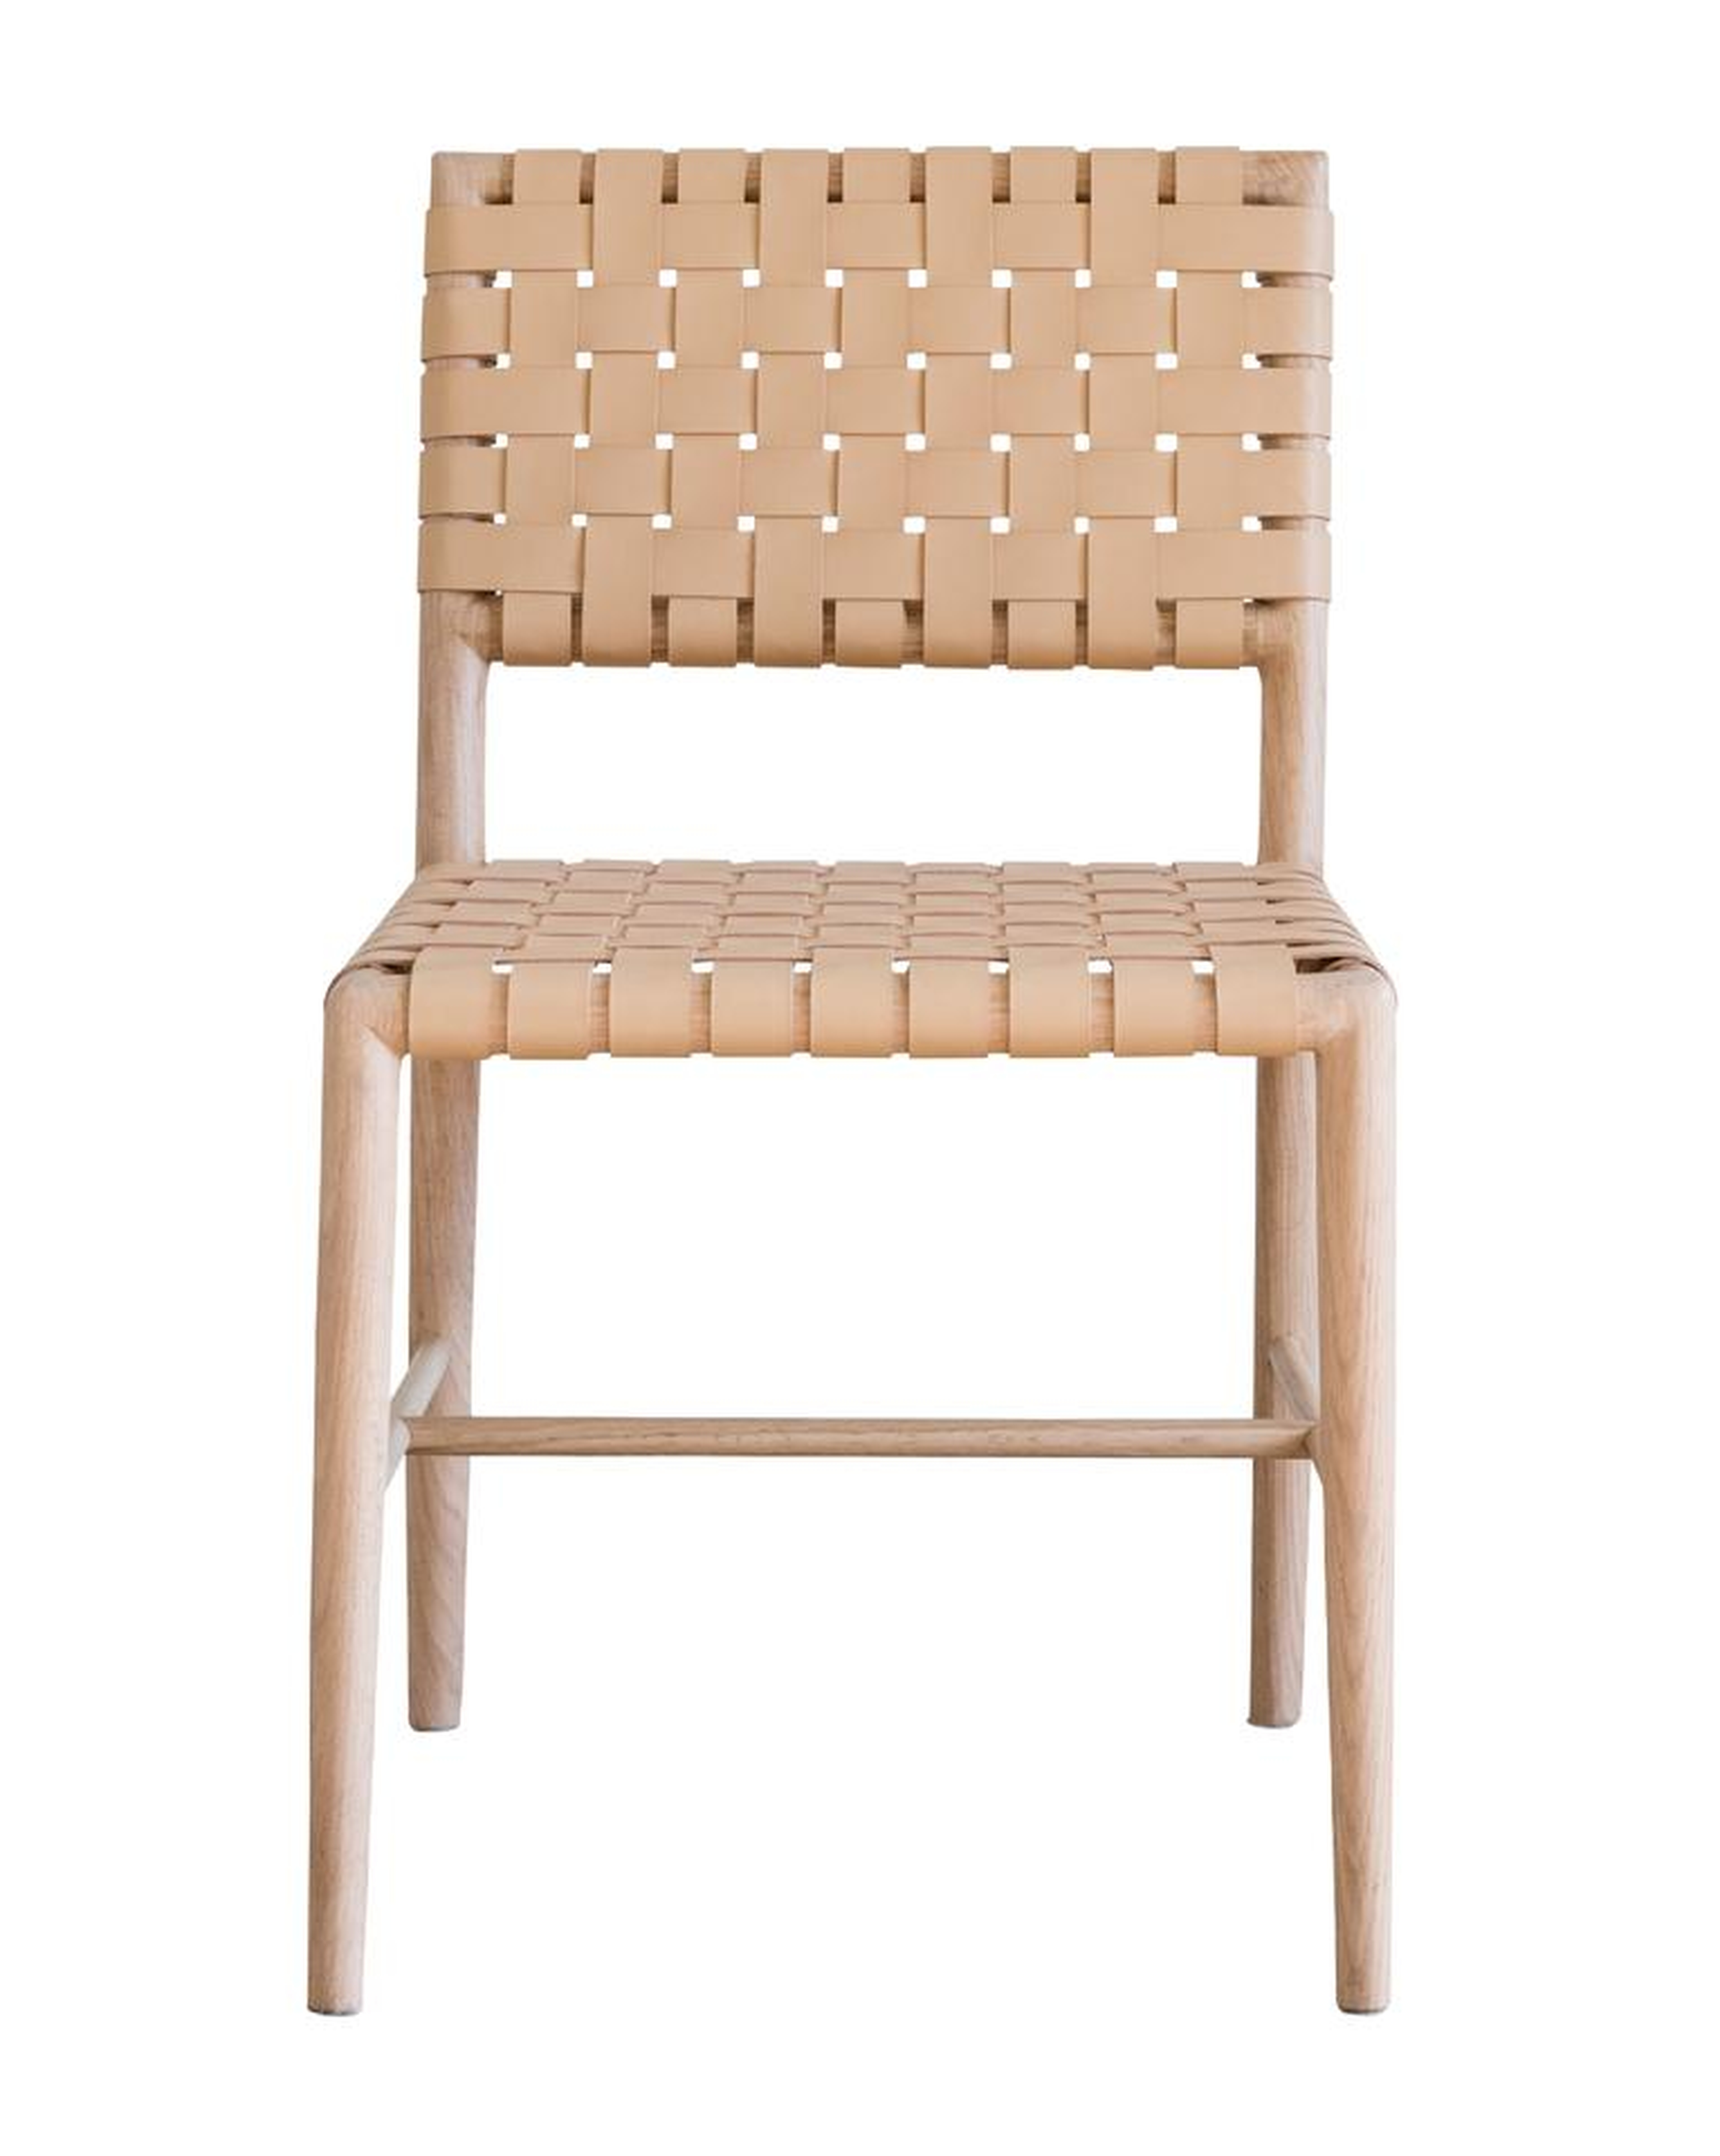 GREELY CHAIR - McGee & Co.